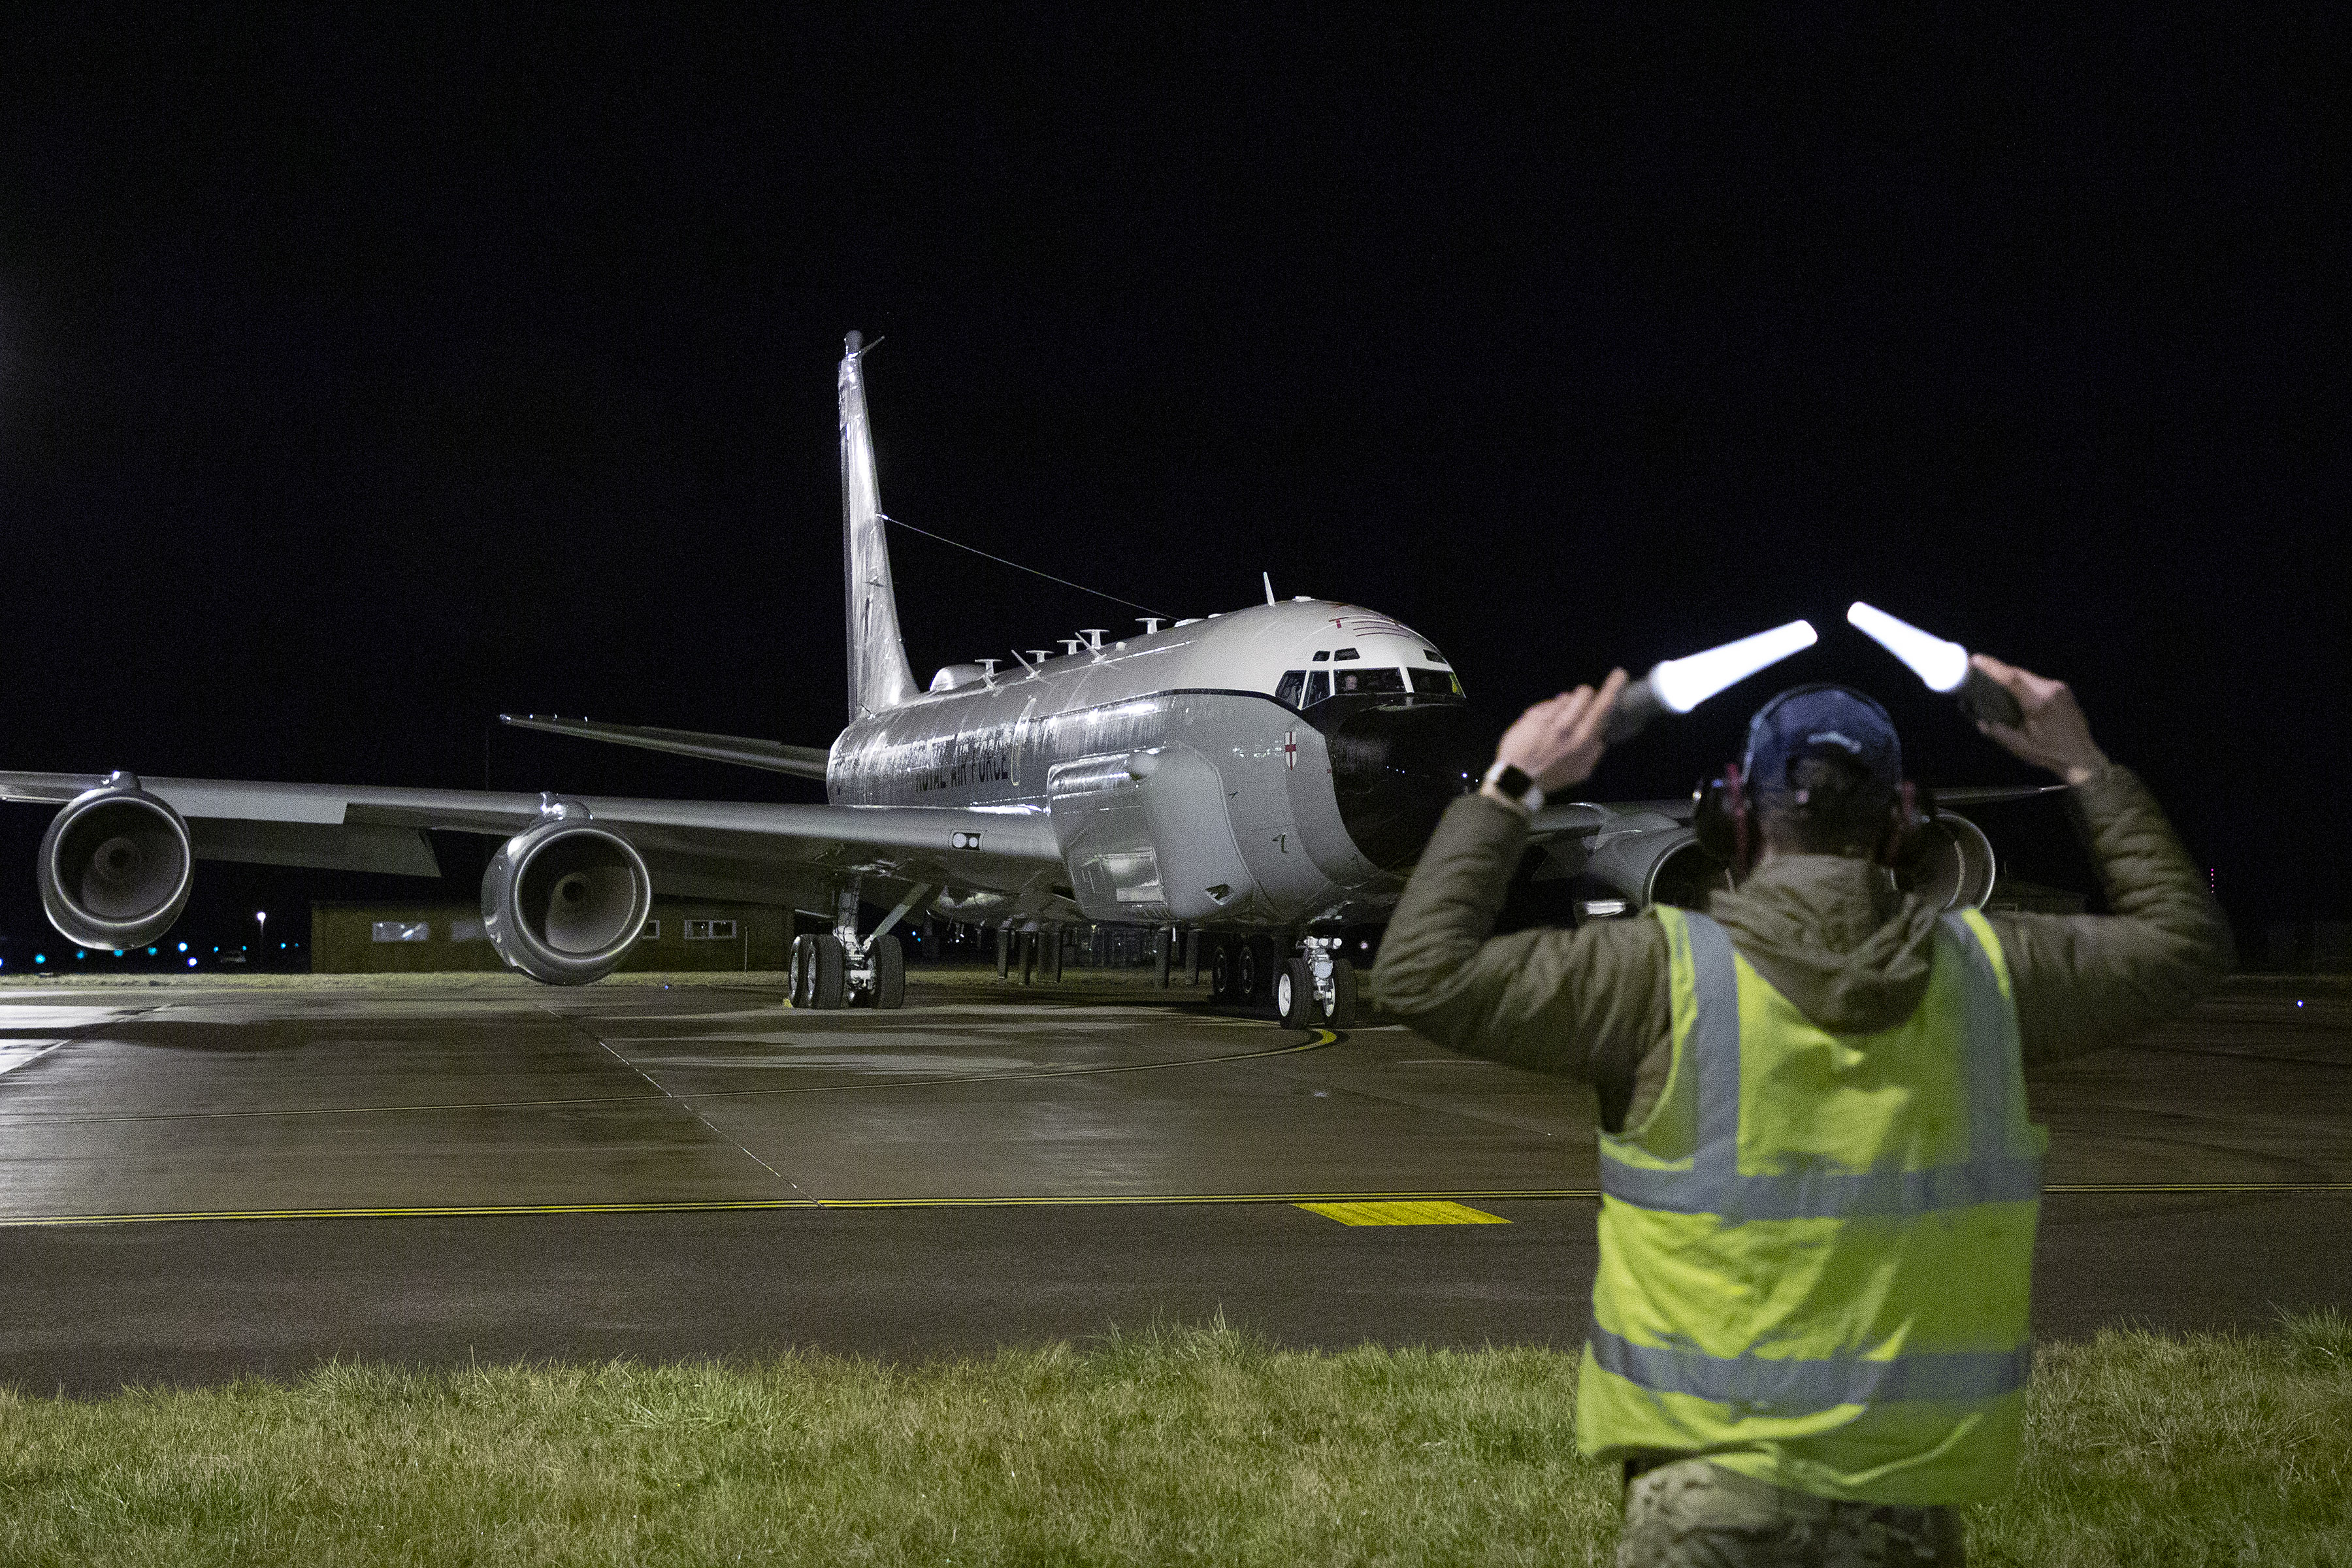 Rivet Joint aircraft guided at night by personnel.